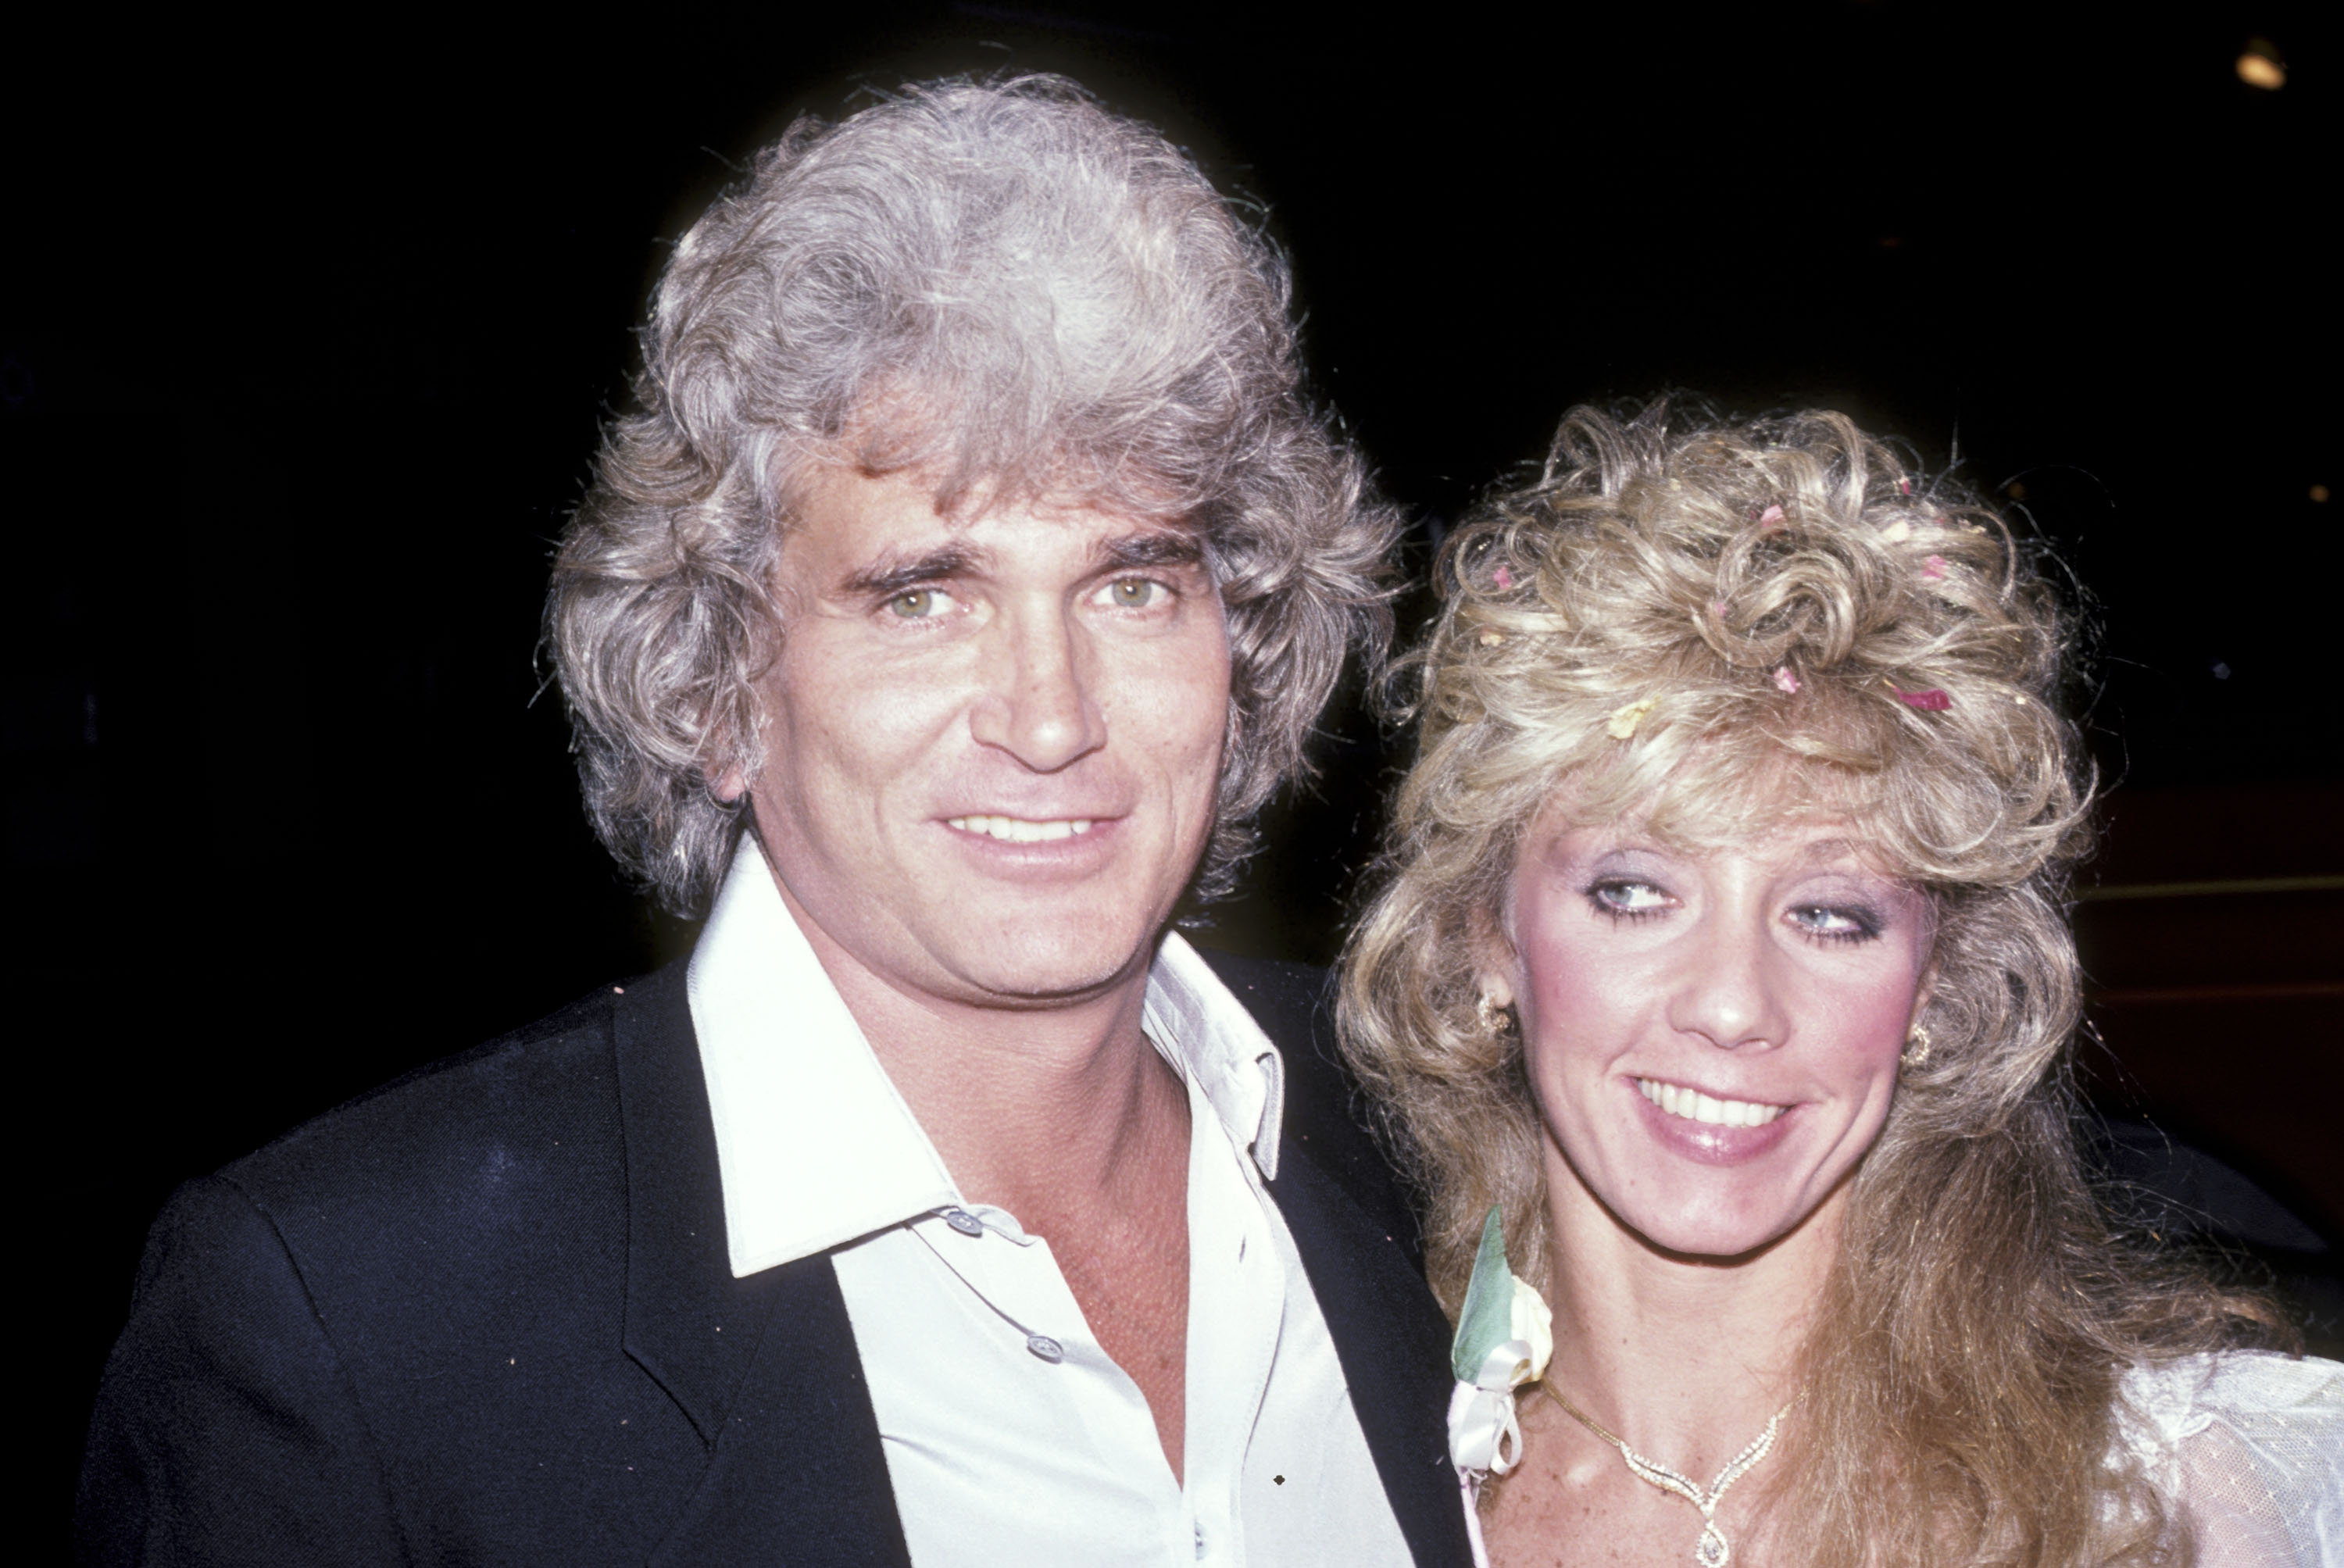 Dodie LevyFraser Inside the Life of Michael Landon's Exwife